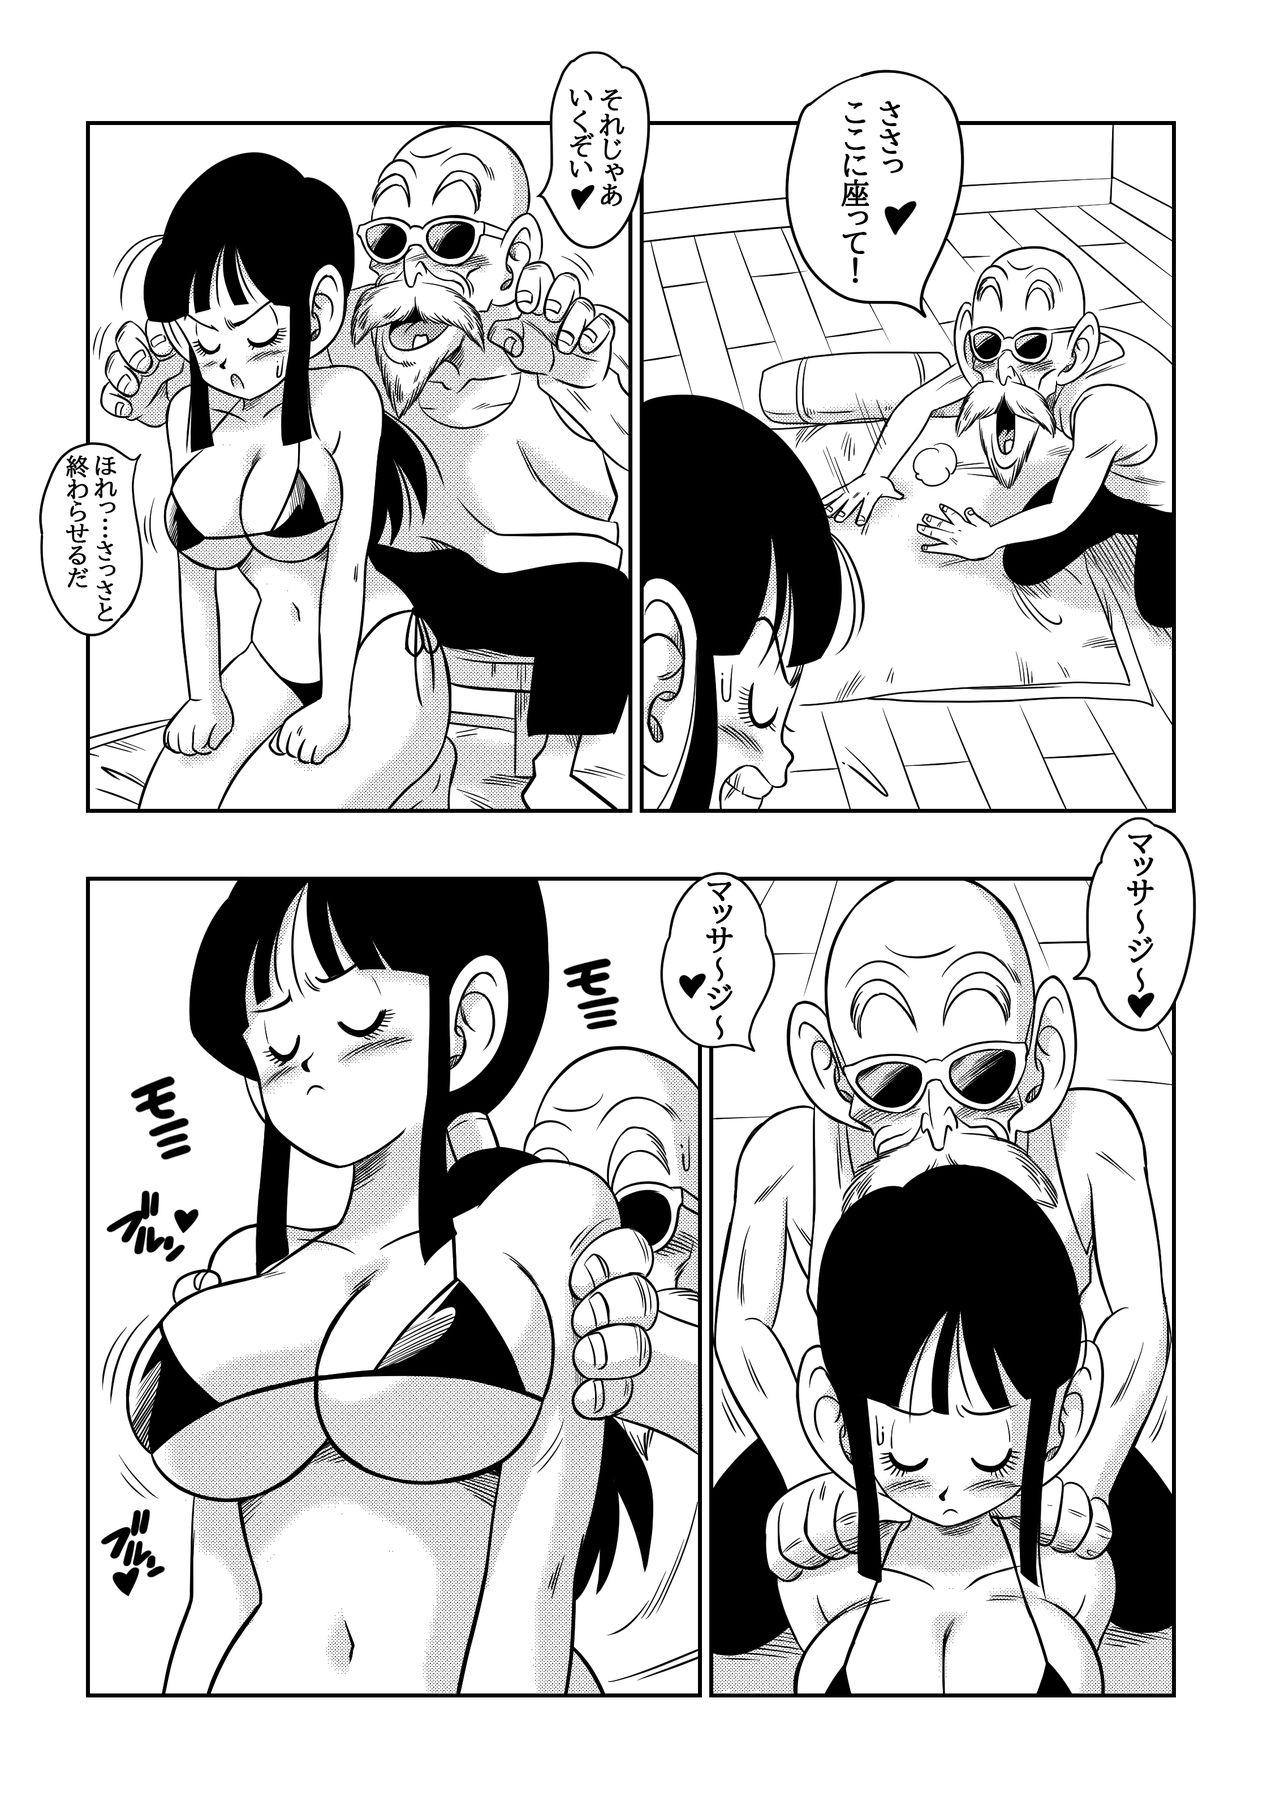 Hymen "An Ancient Tradition" - Young Wife is Harassed! - Dragon ball z Camgirl - Page 8